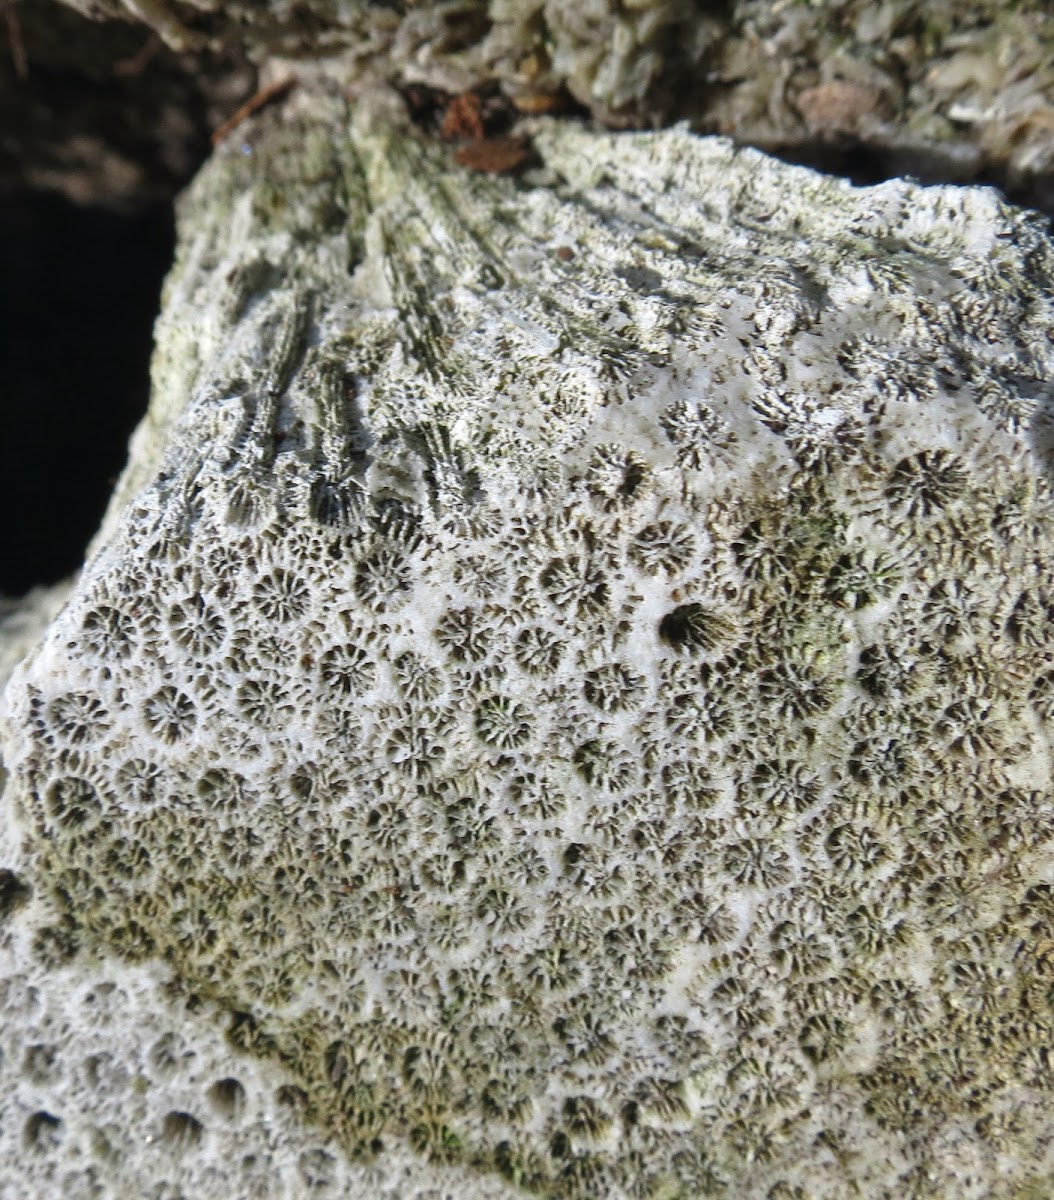 Star coral fossil